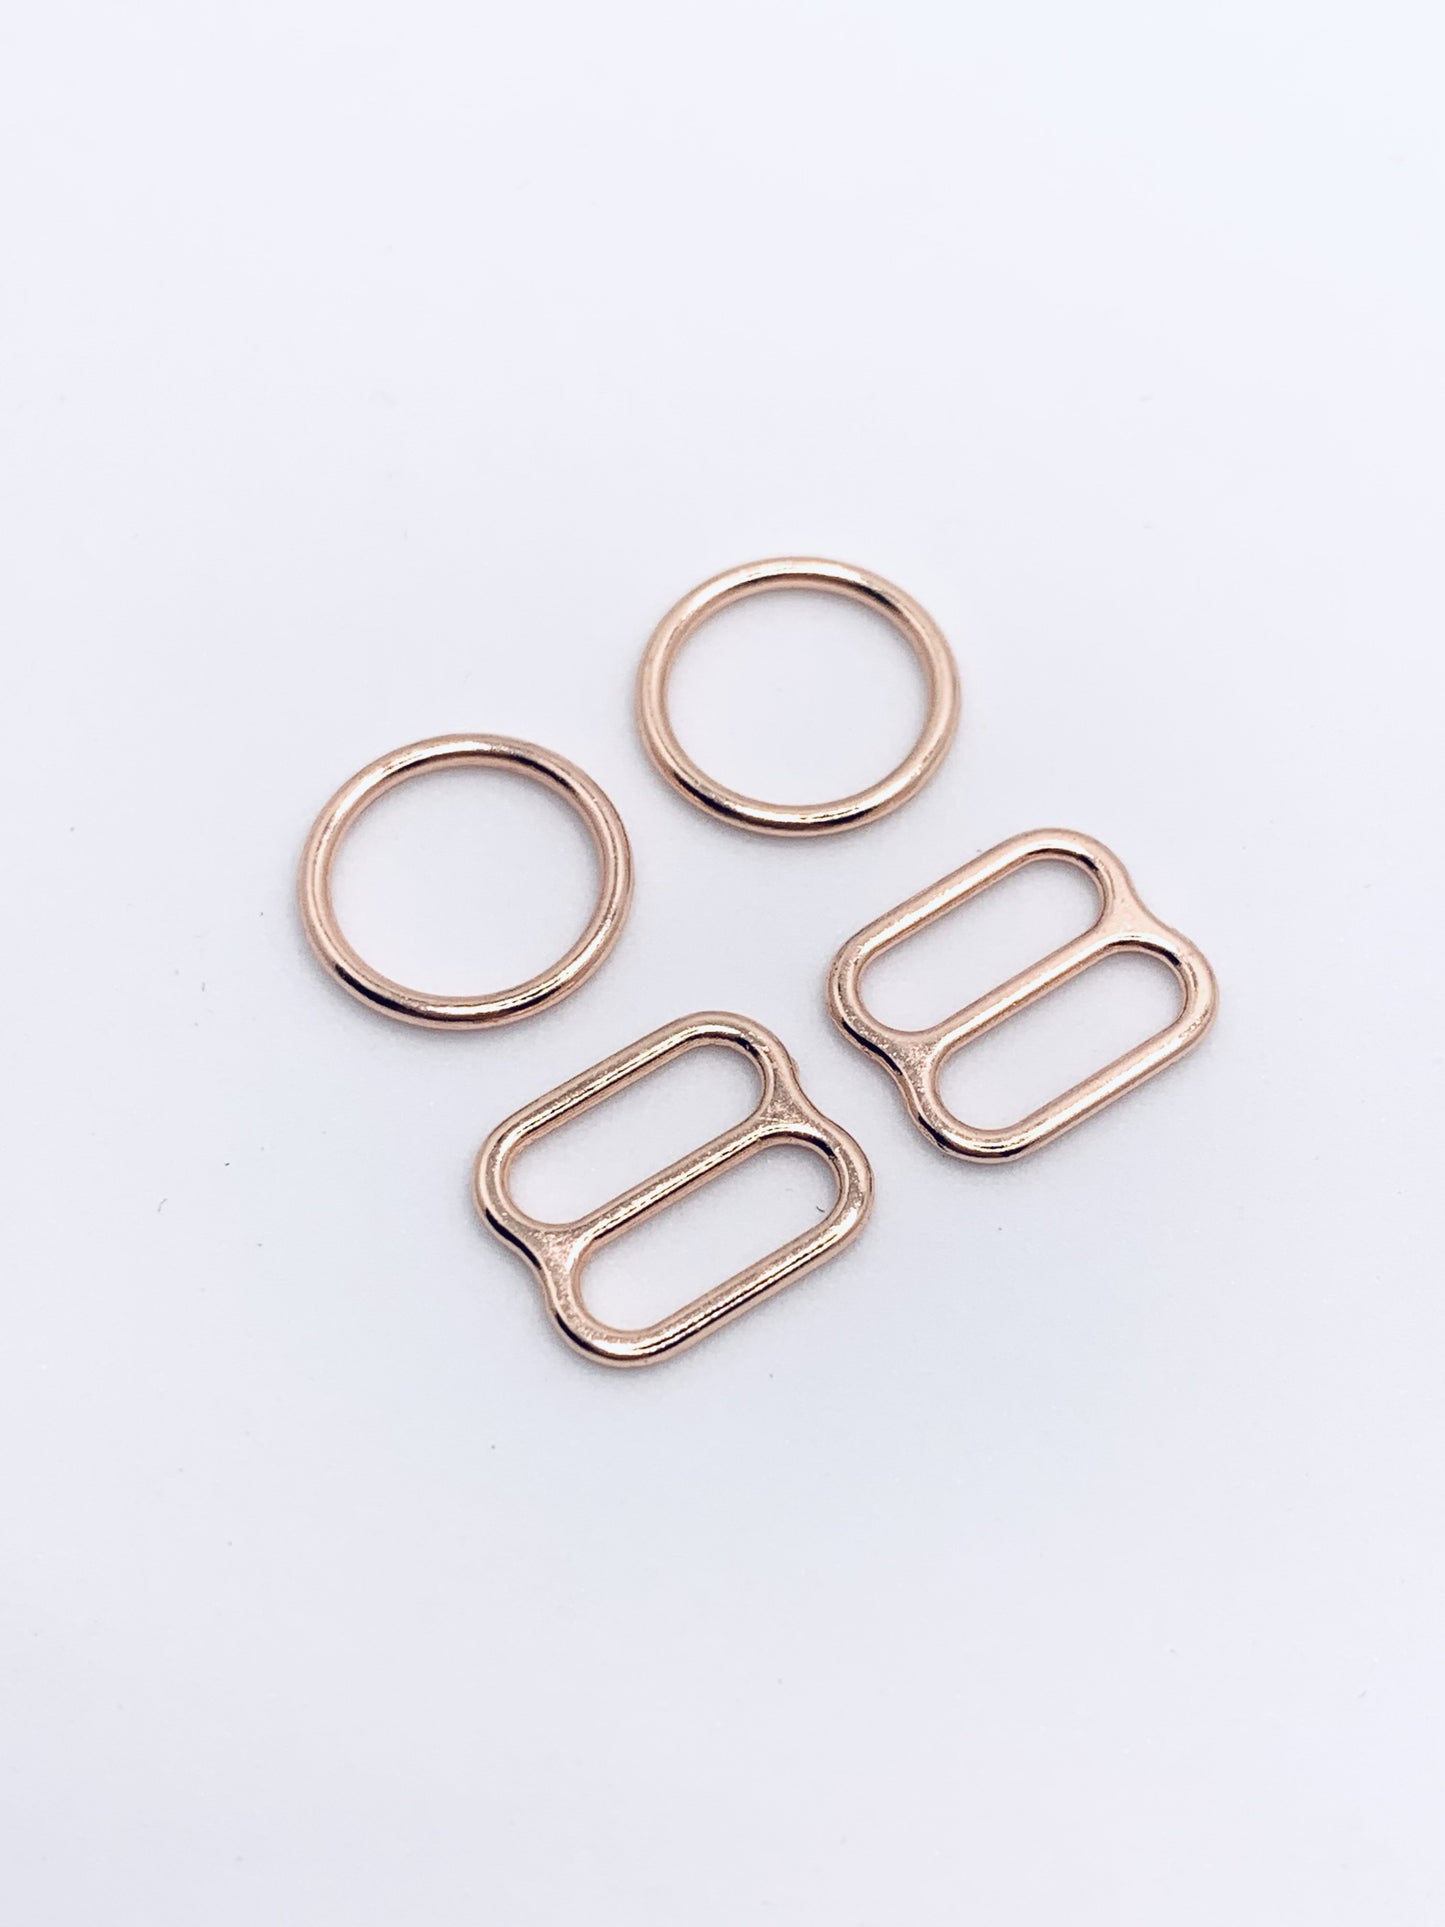 Set of 8mm Gold Rings and Sliders for Bra Making | 4 pieces